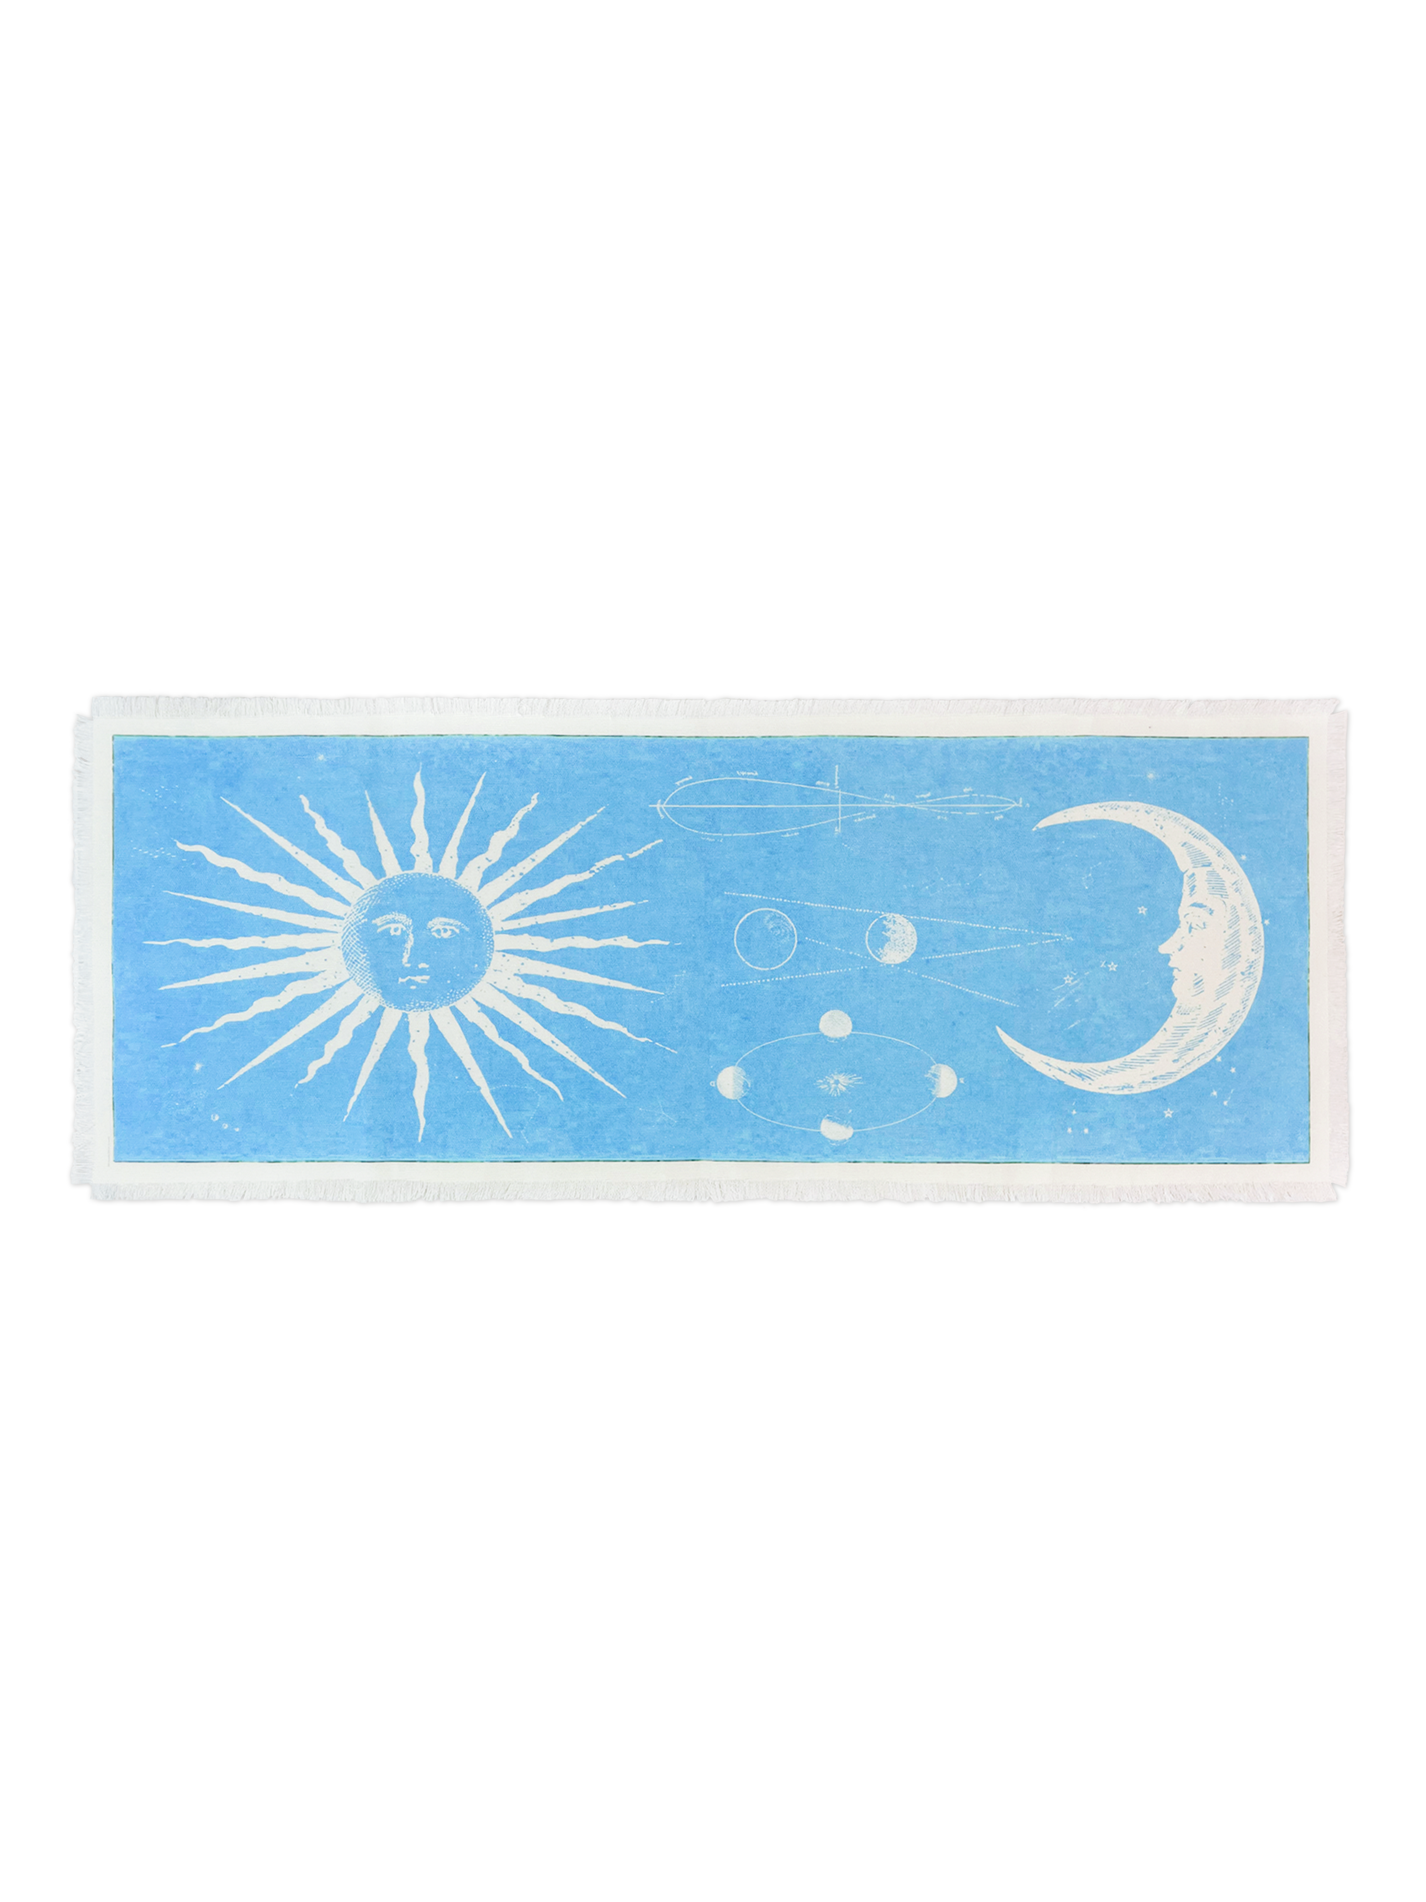 Moon Staring at the Sun Fabric Poster